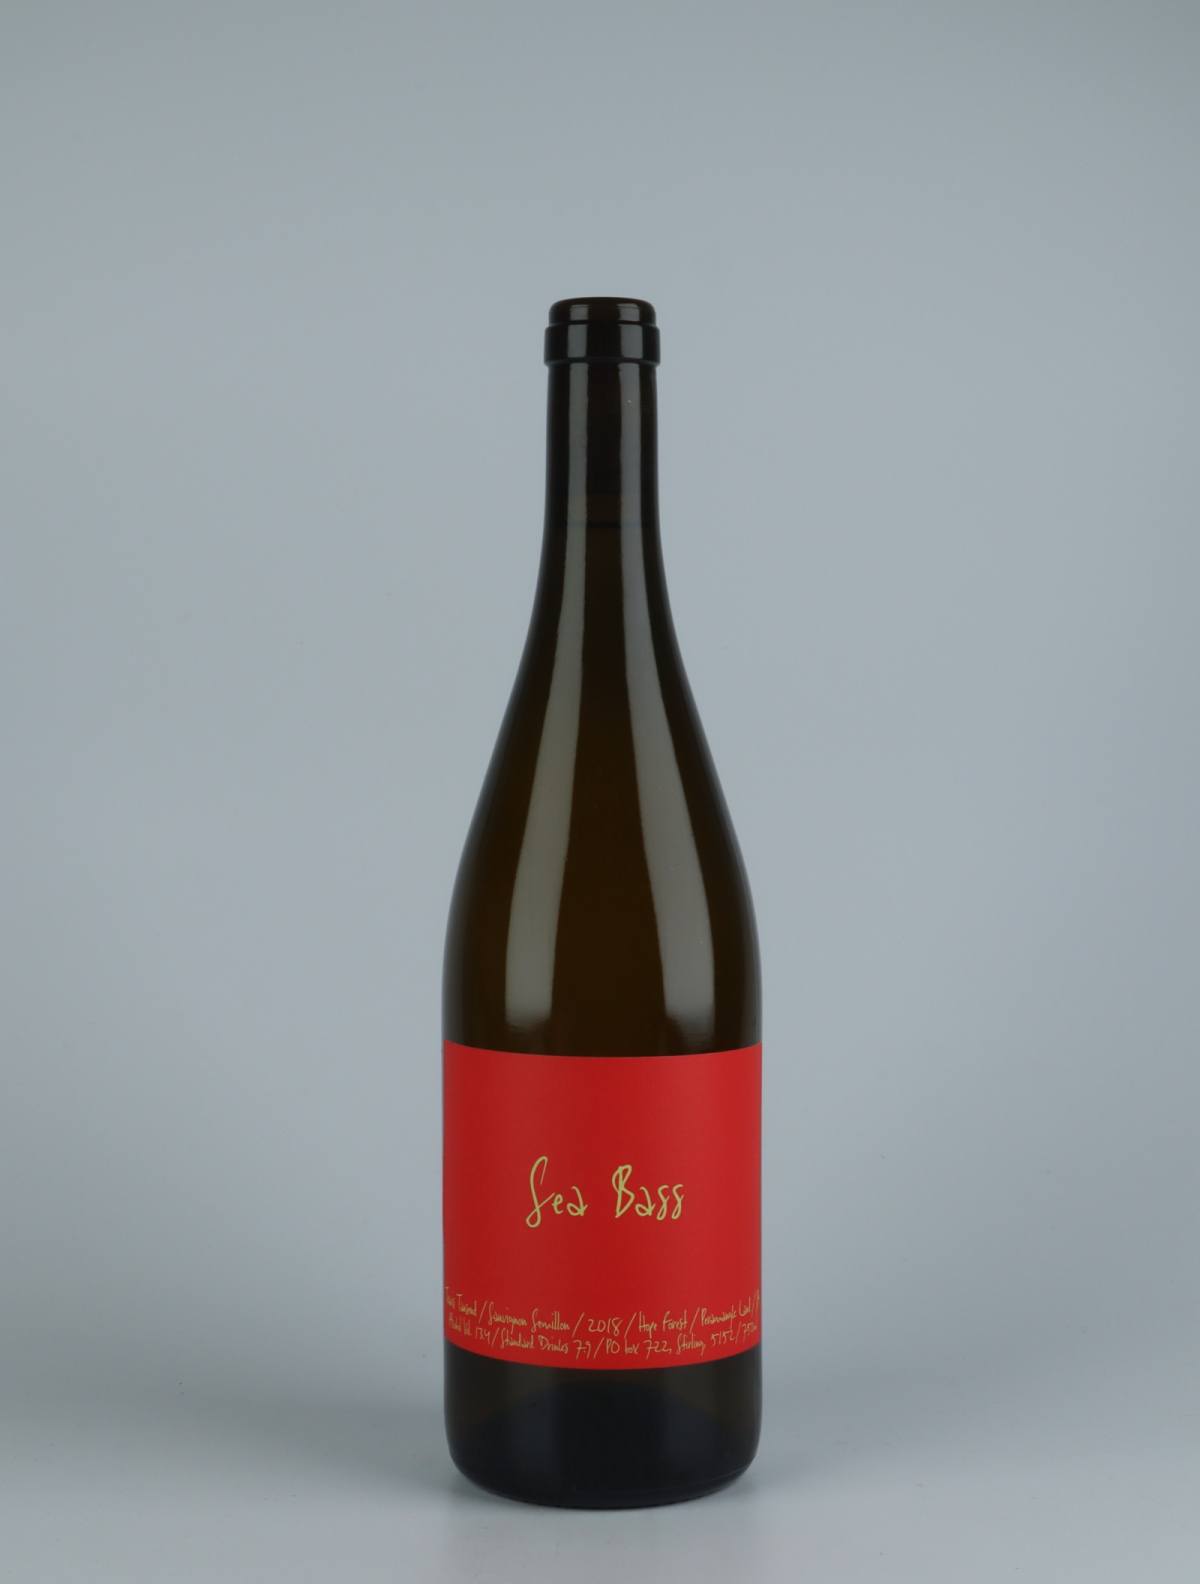 A bottle 2018 Sea Bass White wine from Travis Tausend, Adelaide Hills in 